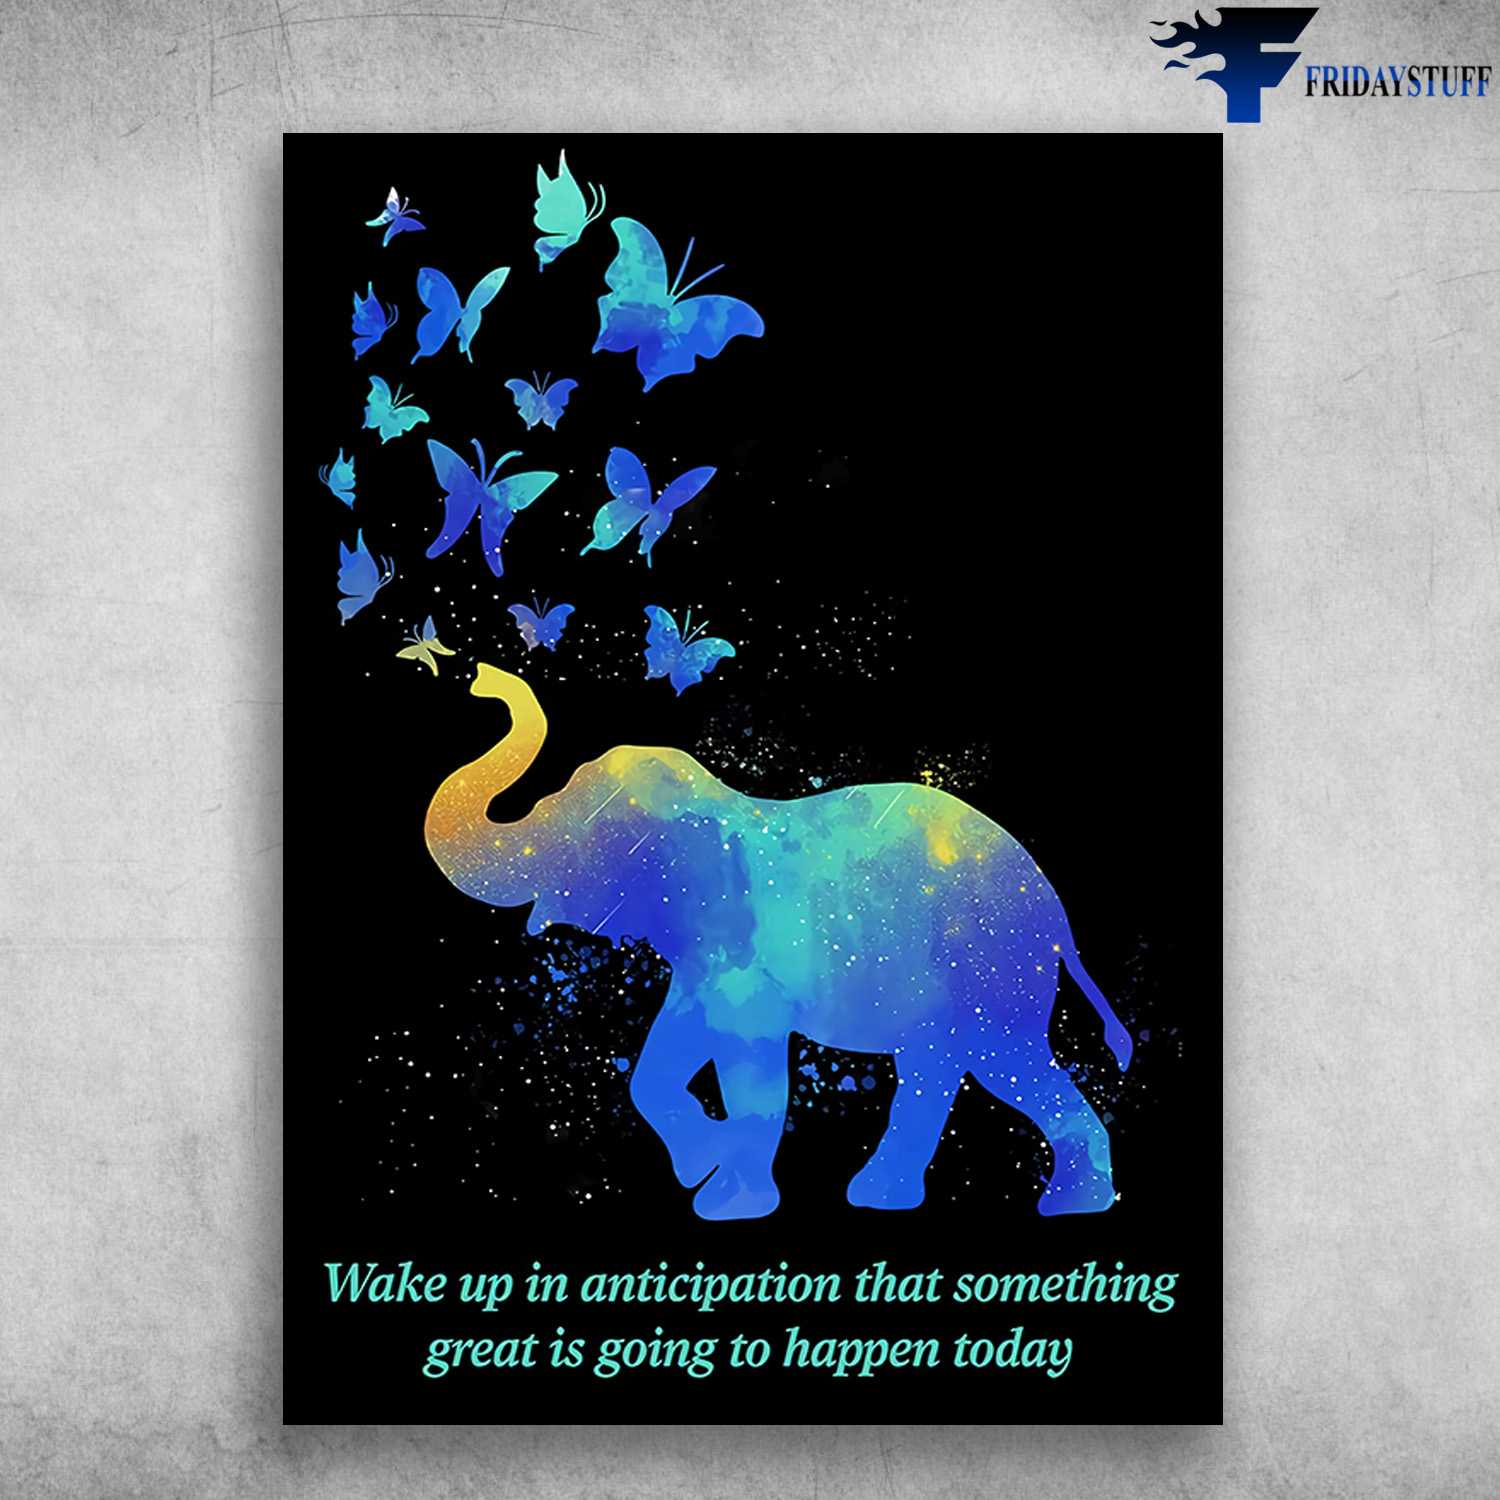 Elephant Poster, Butterfly Elephant, Wake Up In Anticipation That, Something Great, Is Going To Happen Today